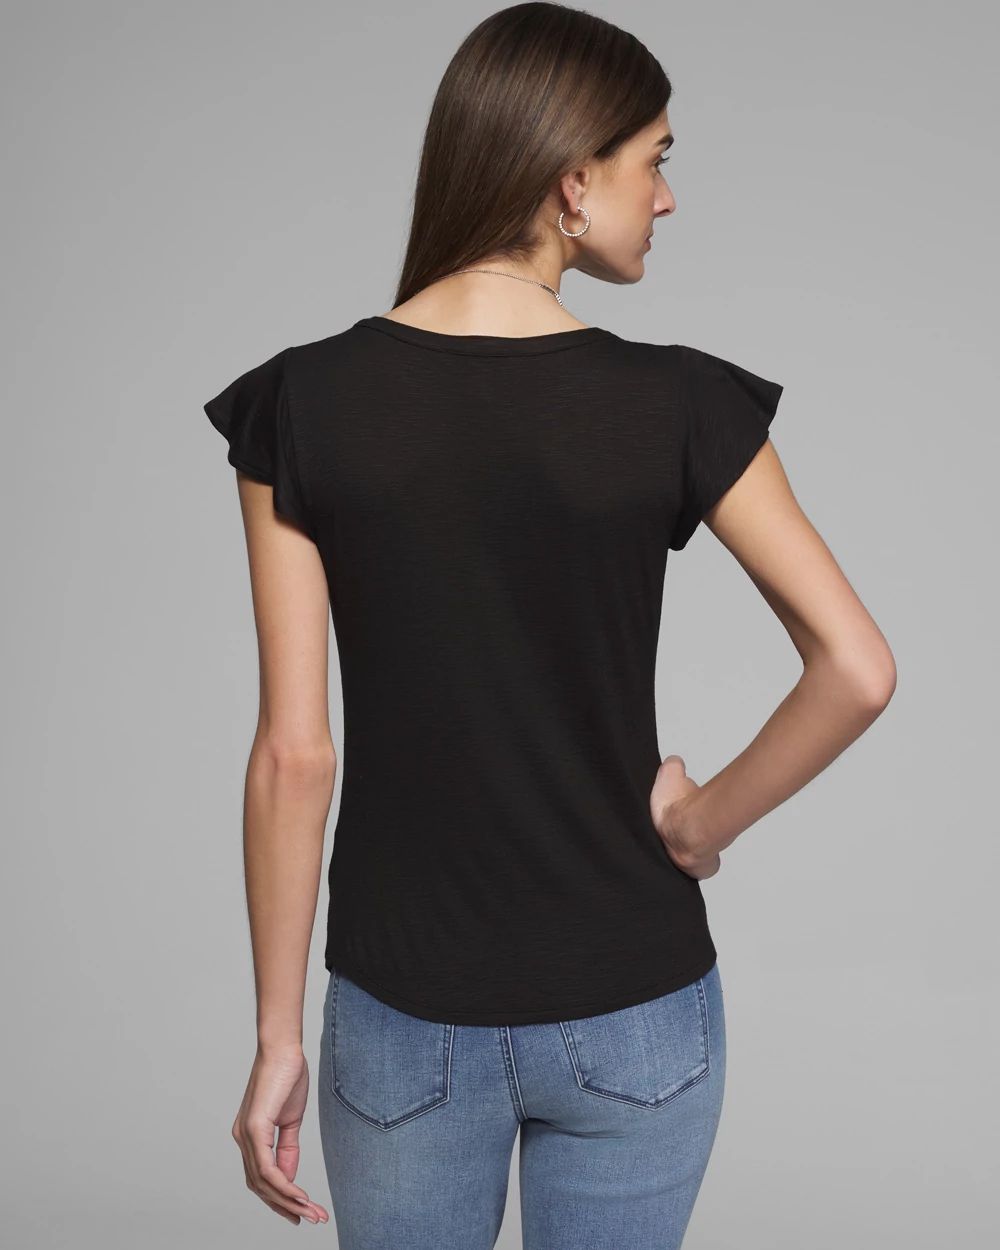 Outlet WHBM Notch Neck Ruffle Tee click to view larger image.